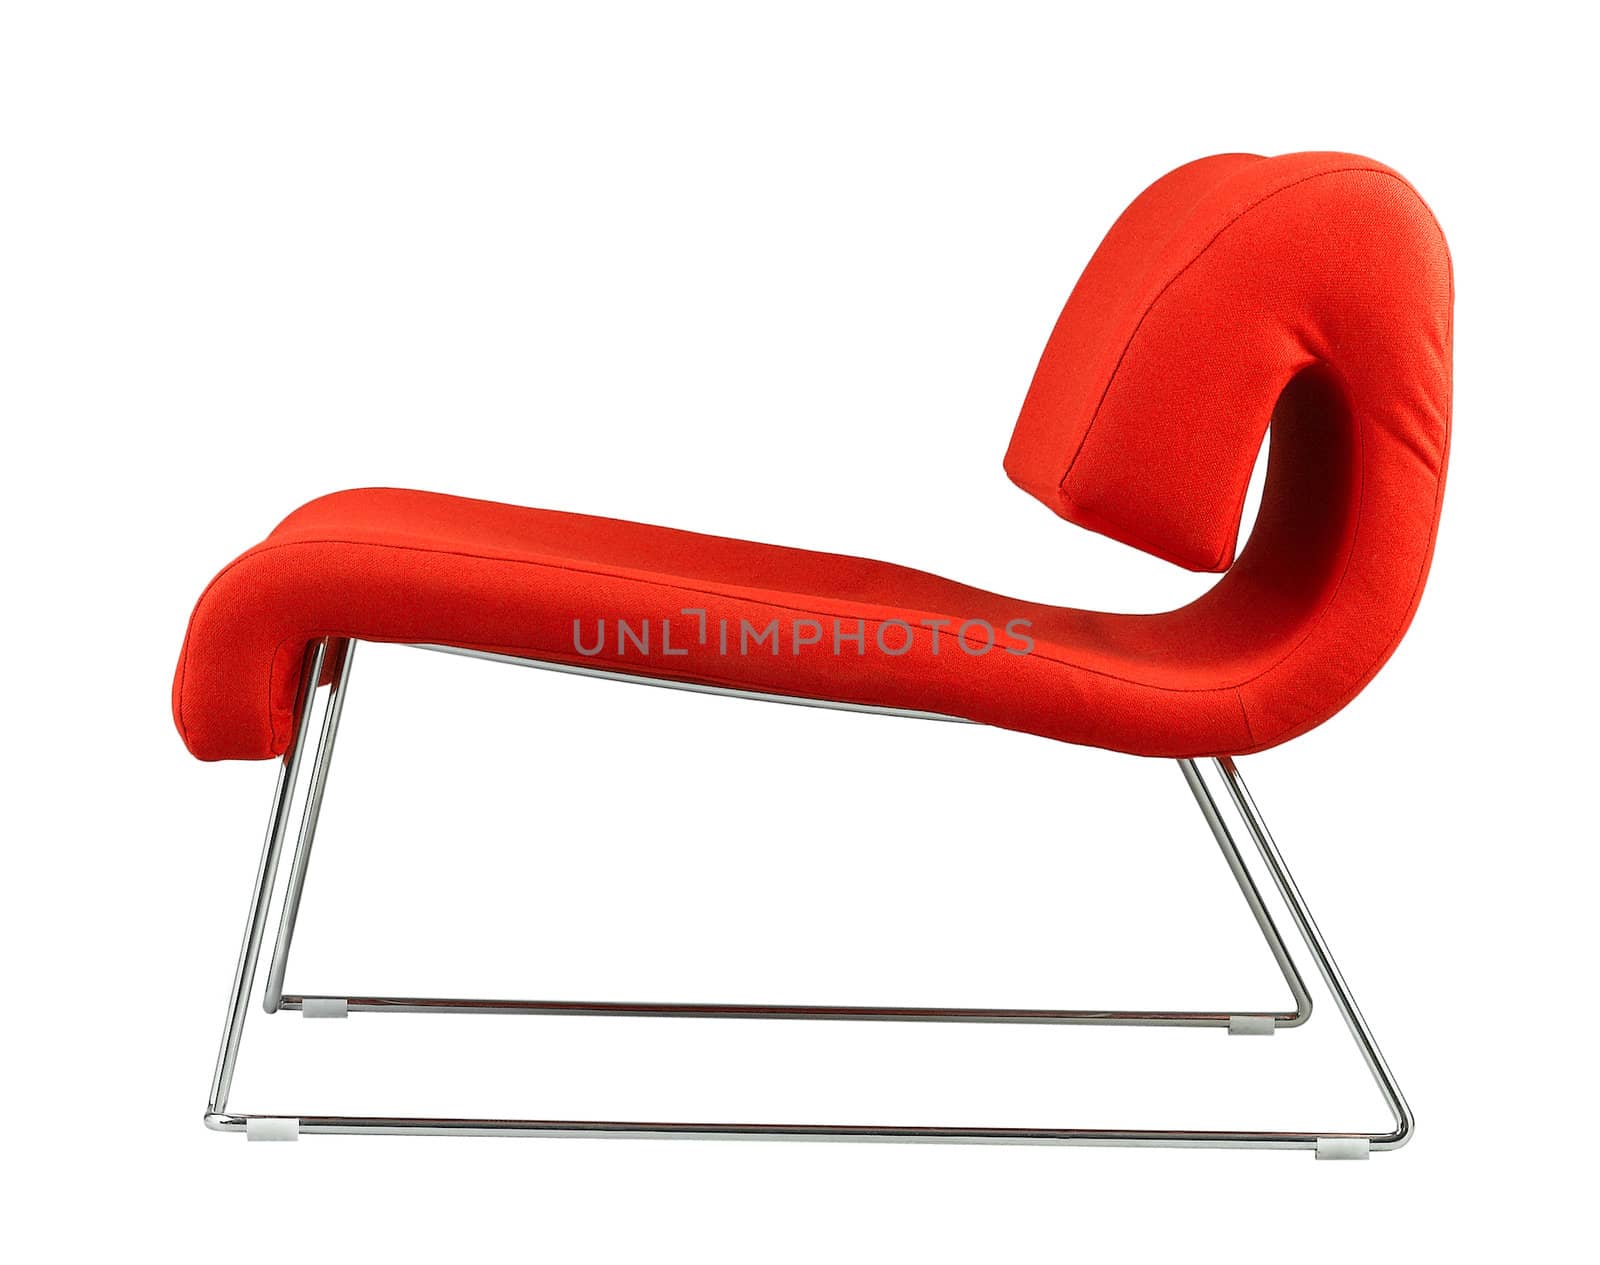 Nice and modern design of the red chair